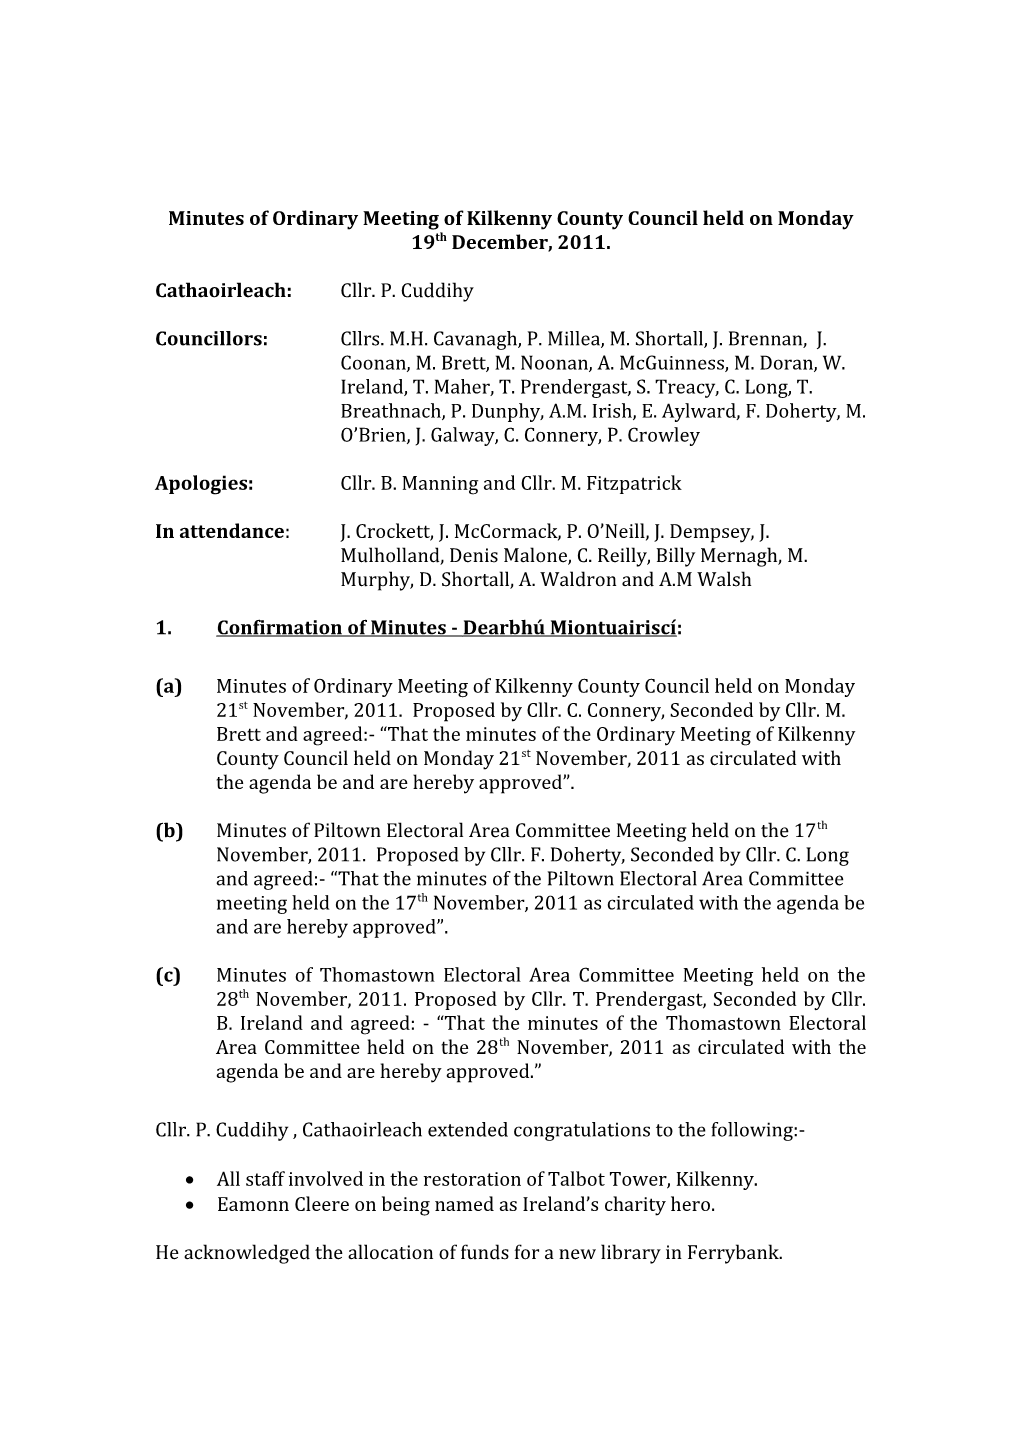 Minutes of Ordinary Meeting of Kilkenny County Council Held on Monday 20Th June, 2011